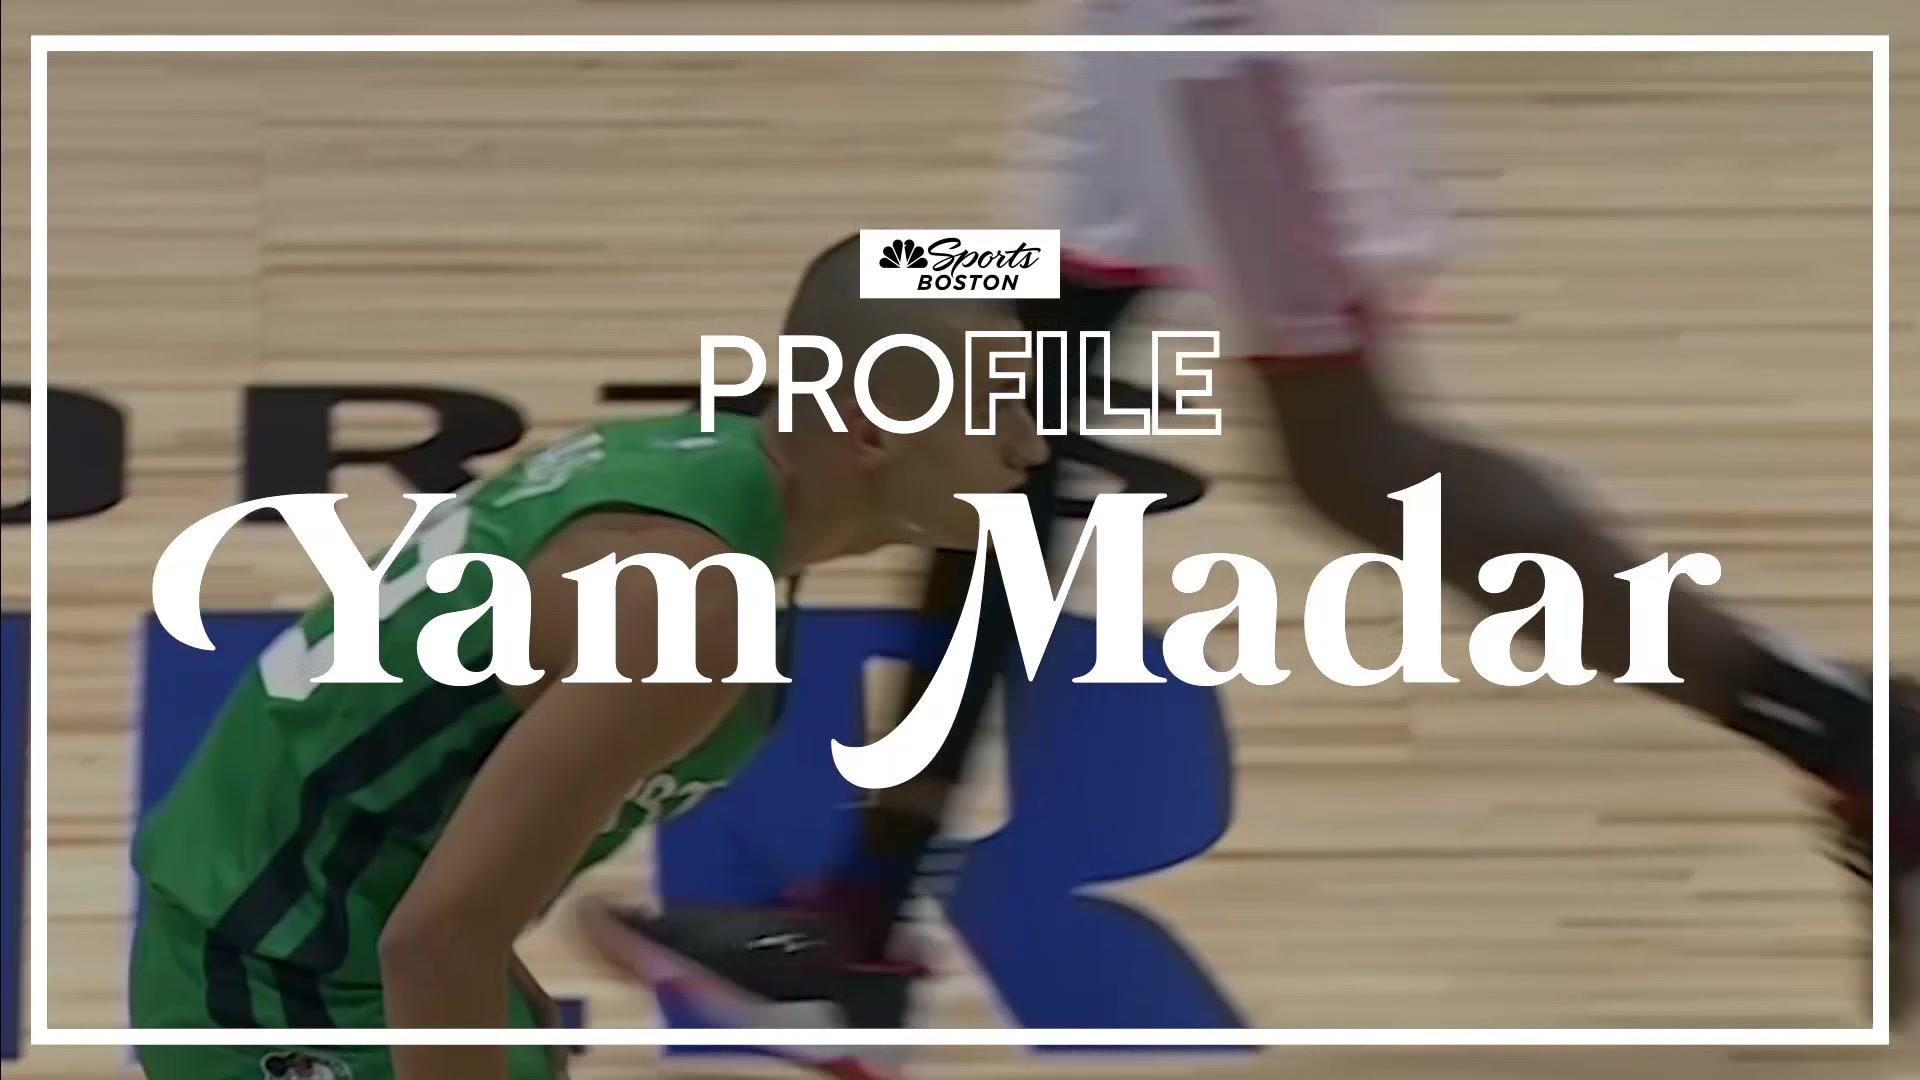 What could Yam Madar show the Celtics at NBA Summer League? - The